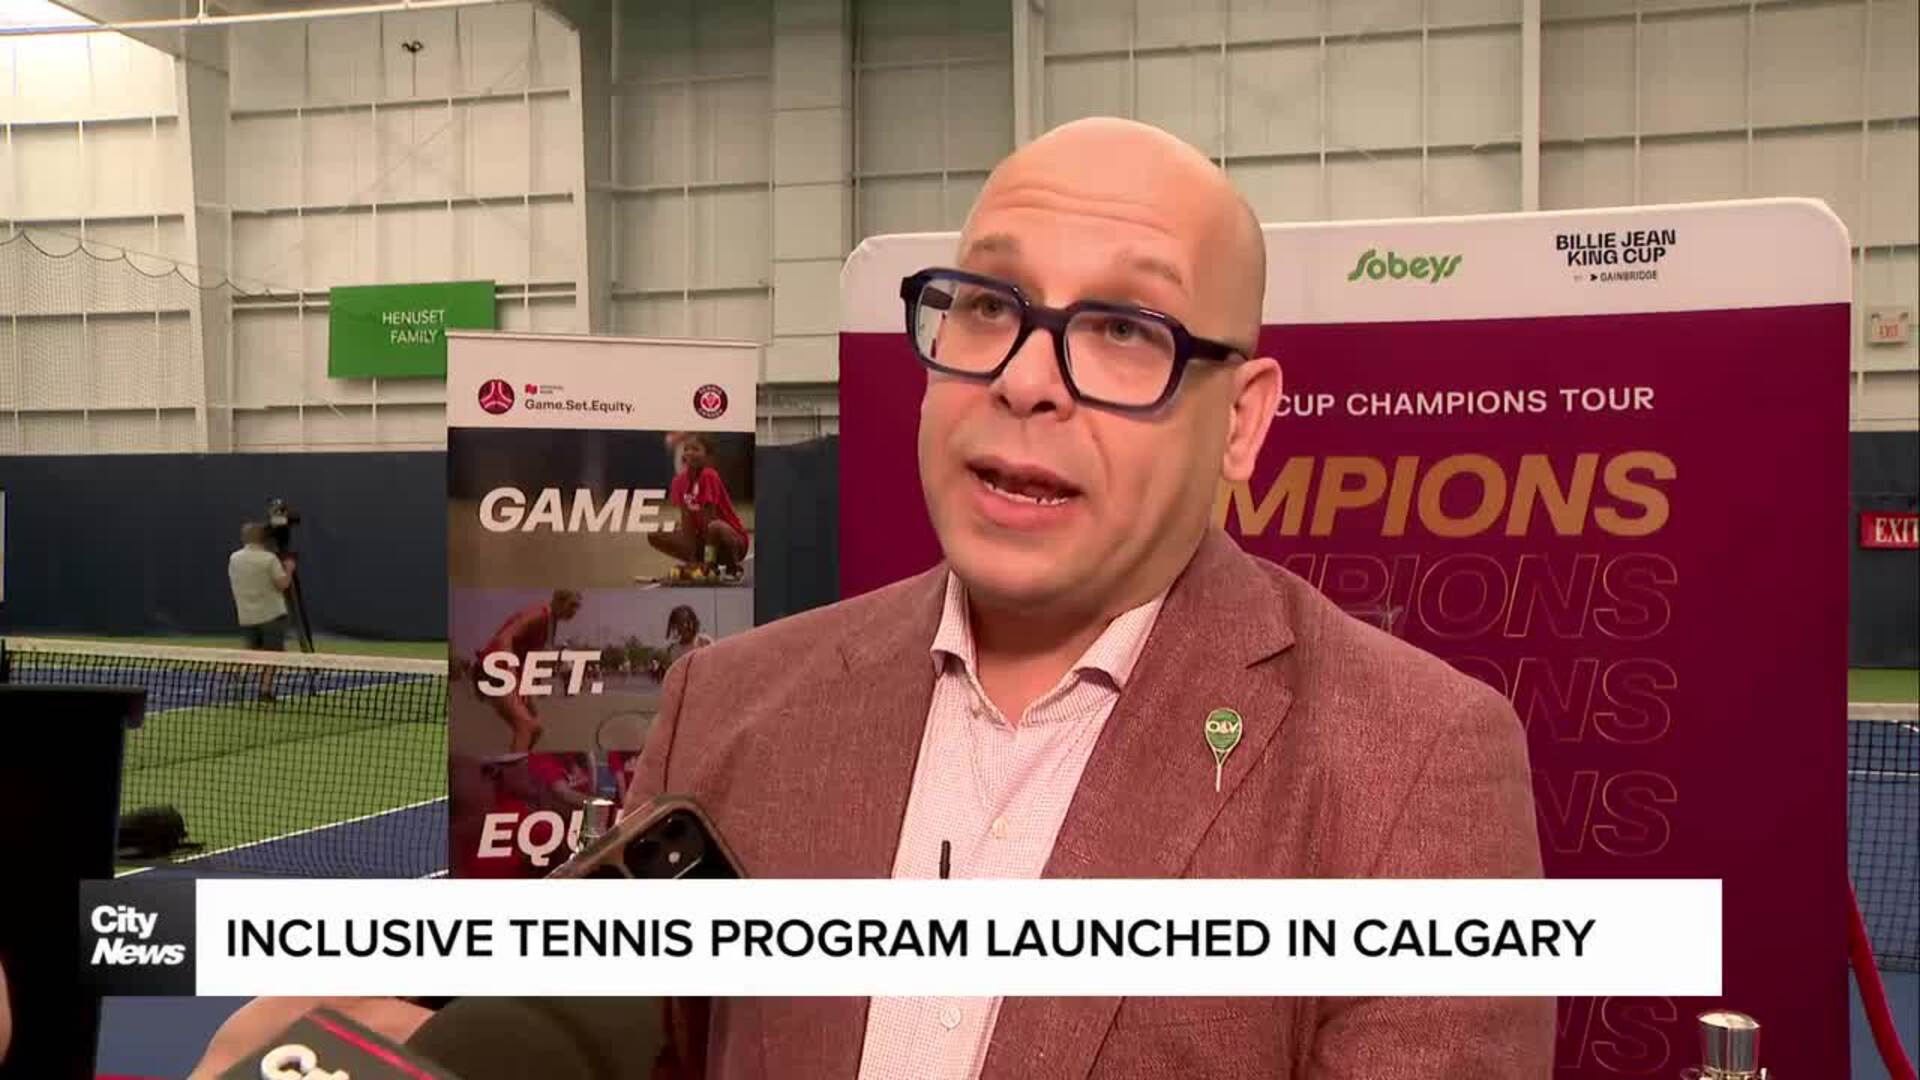 Inclusive tennis program launched in Calgary